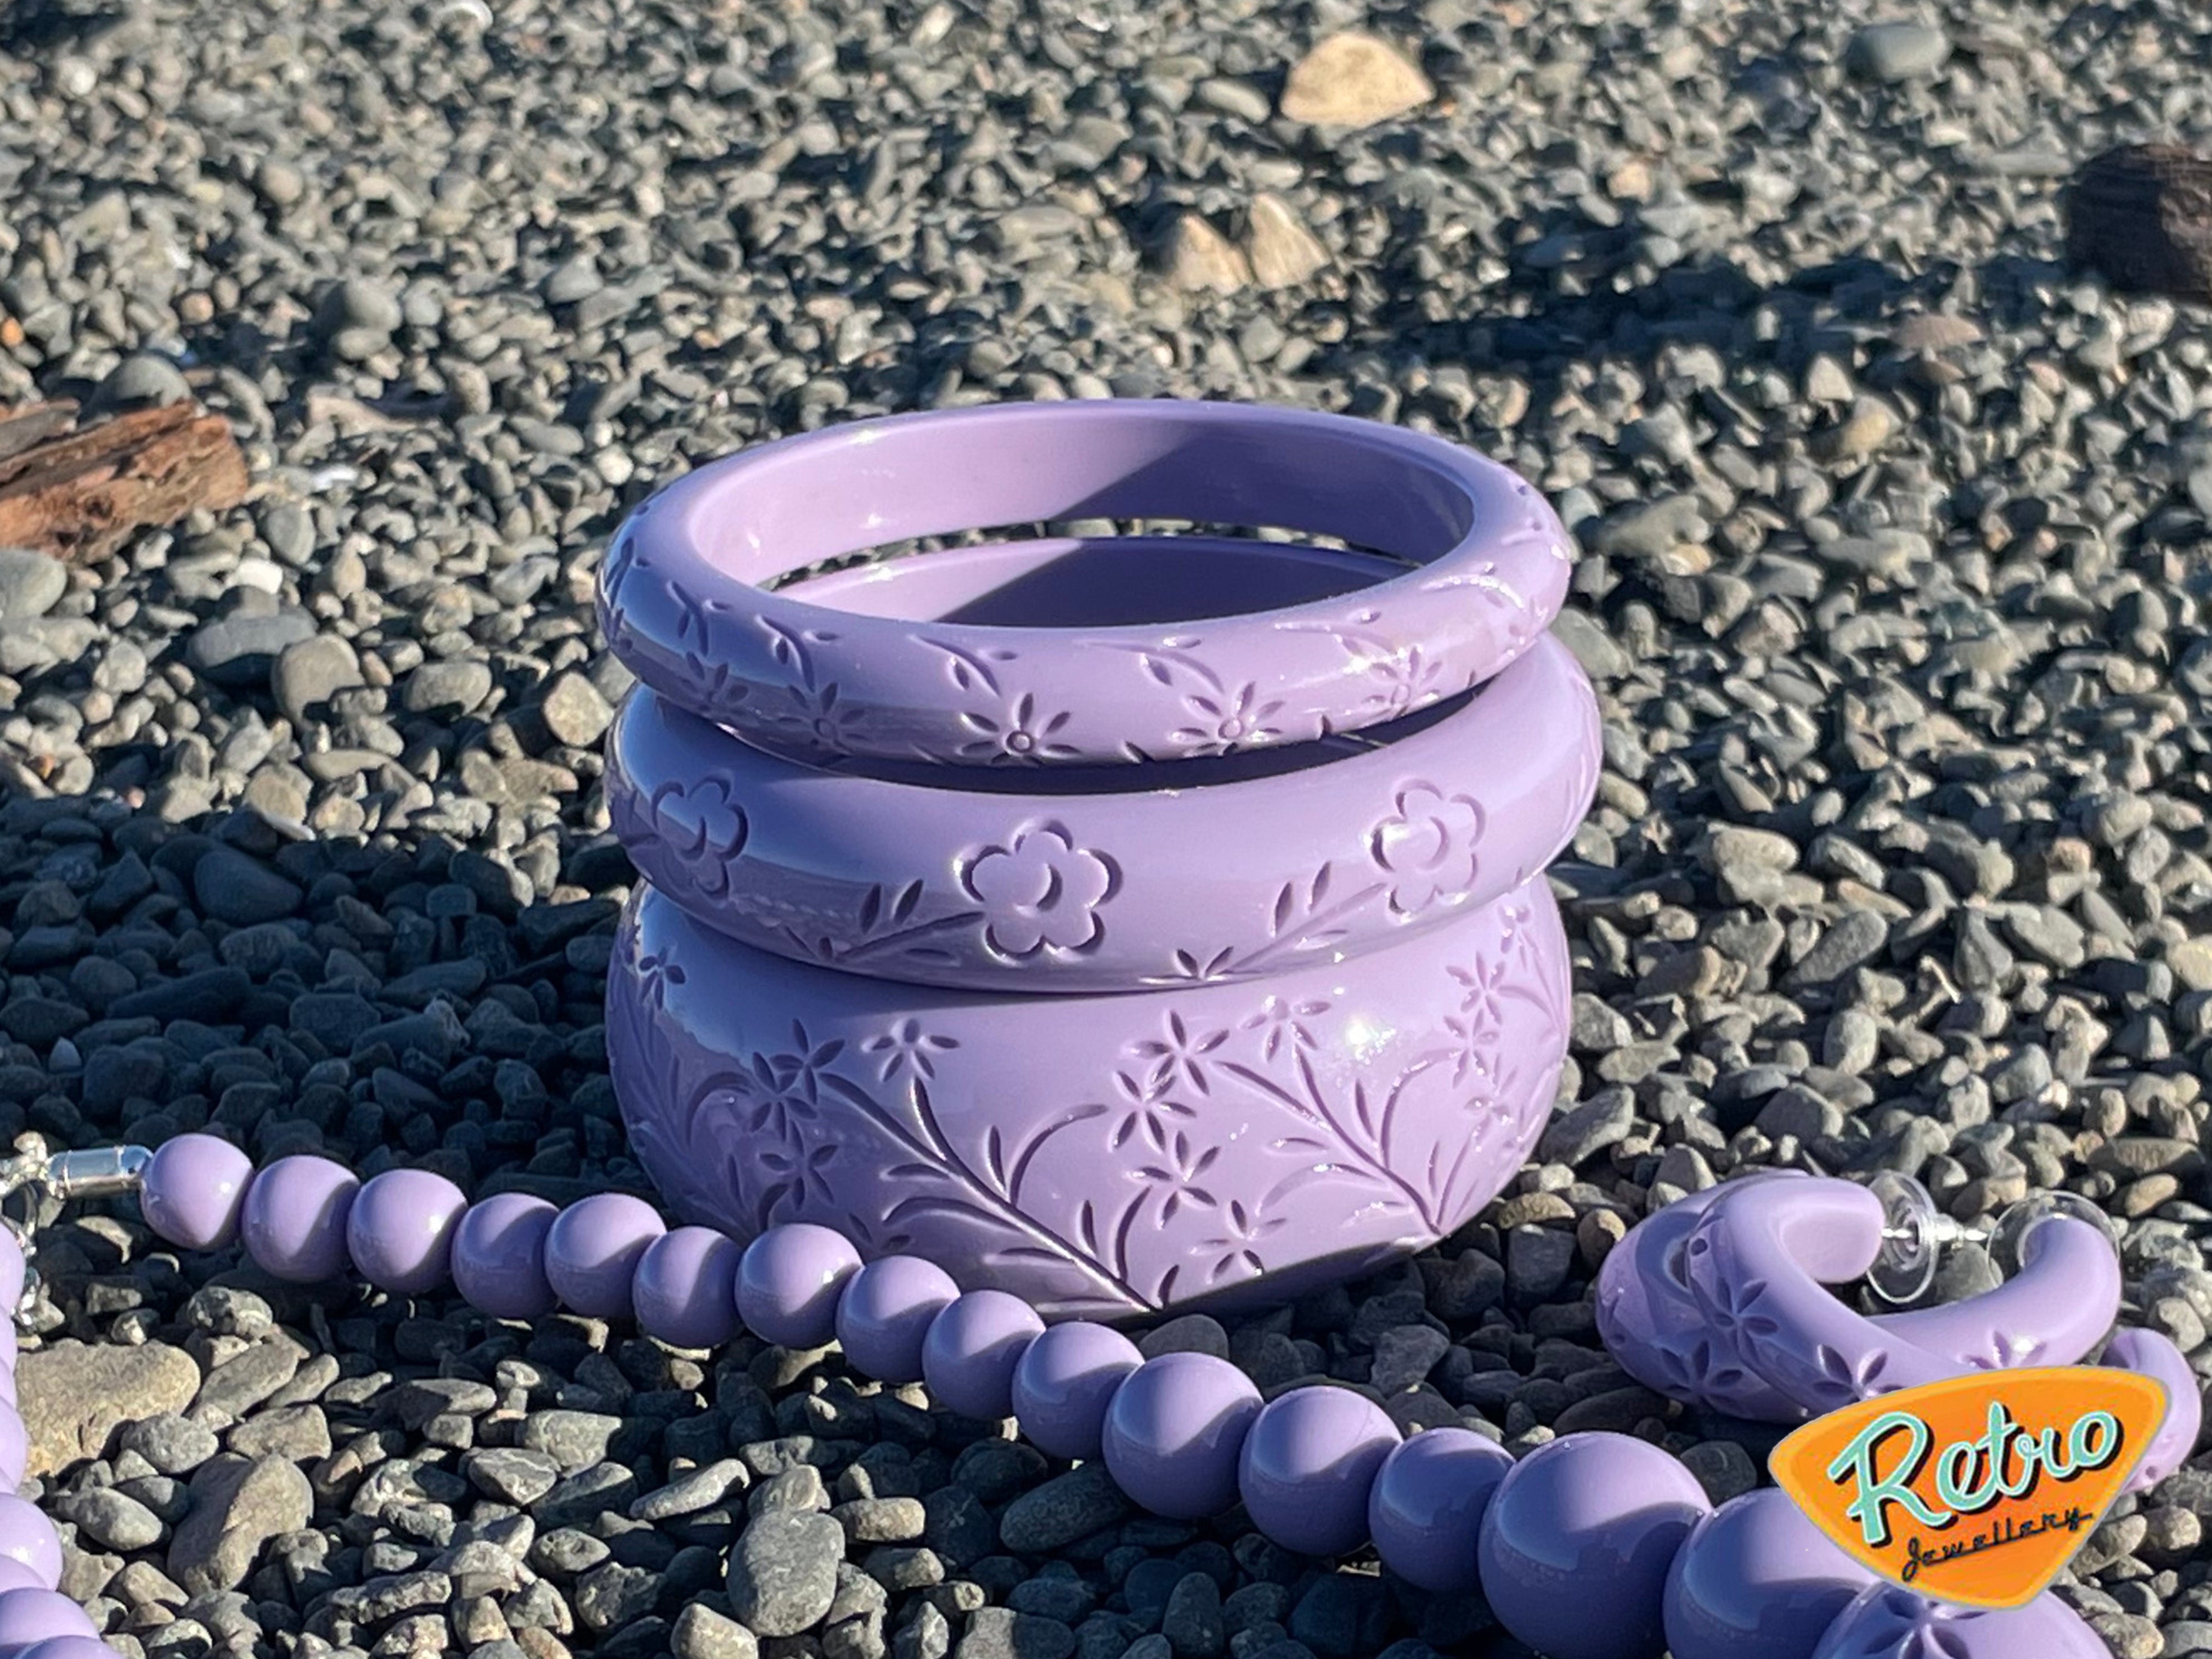 Midi "Blossom" in lilac by MCR carved fakelite bangle